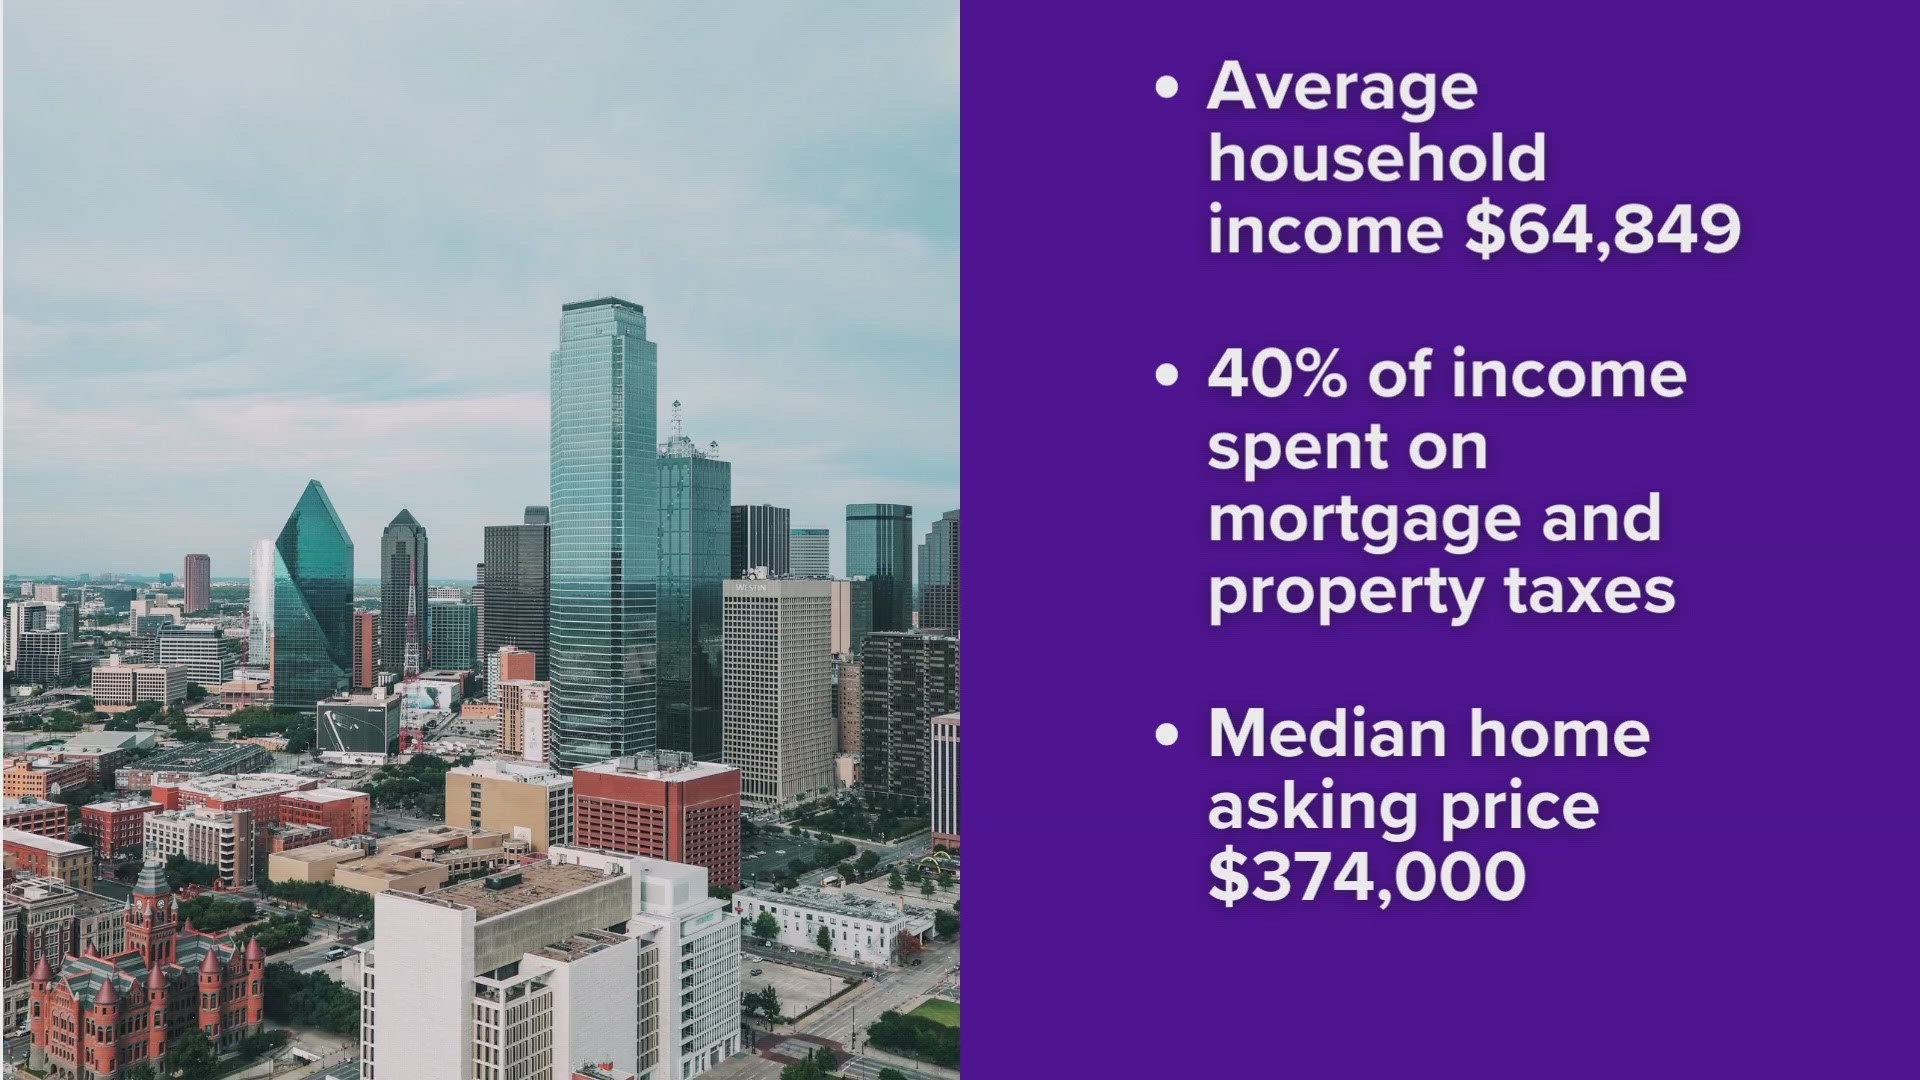 Dallas is the least affordable city for housing in North Texas and the second least affordable in the state, a new RealtyHop study reports.